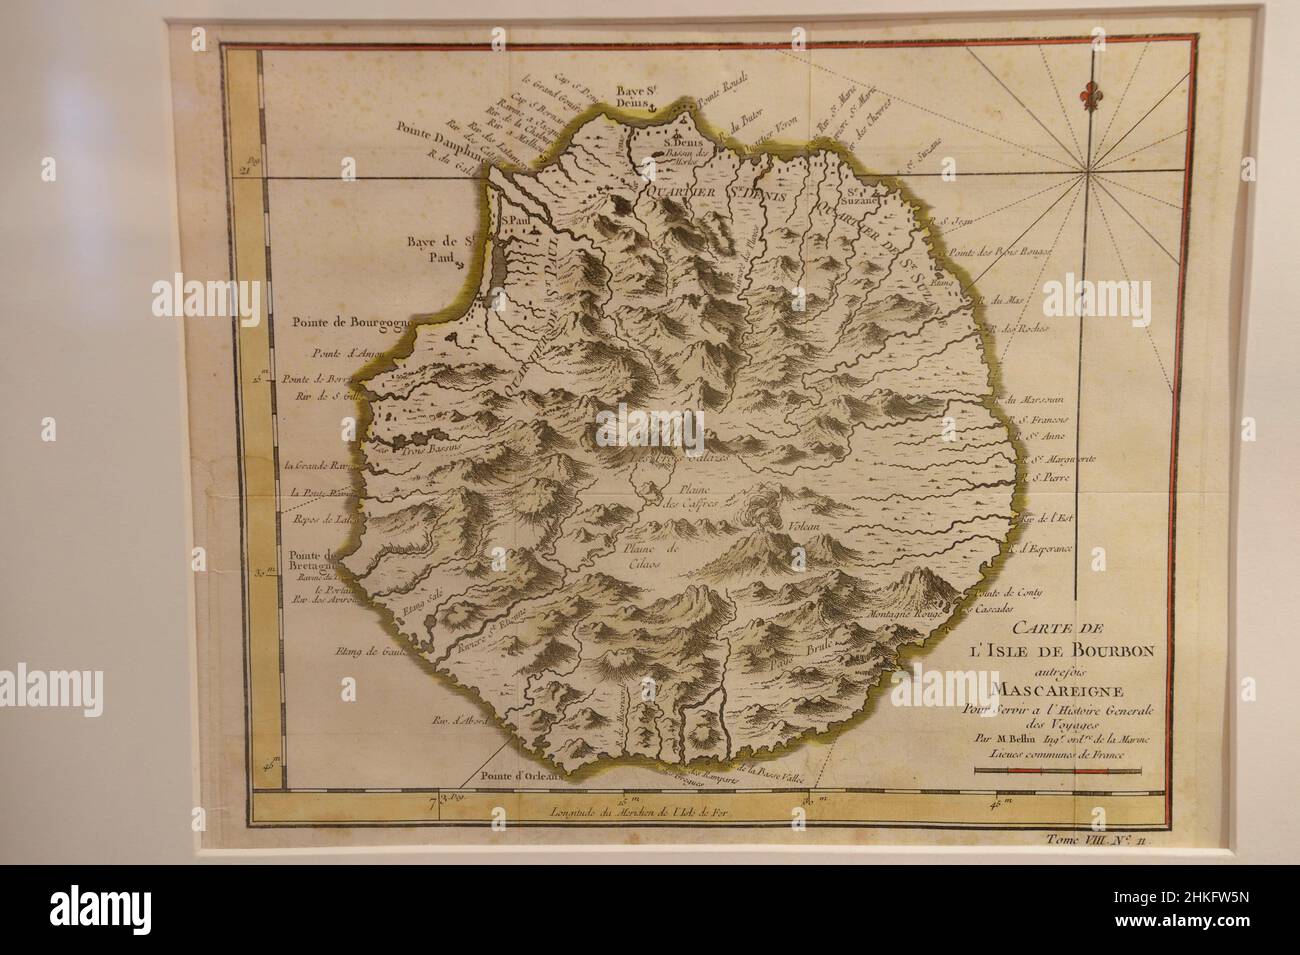 France, Reunion island (French overseas department), Saint Gilles les Hauts, Villèle Museum in the Panon-Desbassyns estate, old map of Ile Bourbon (Reunion island) formerly Mascareigne by cartographer Jacques-Nicolas Bellin, 18th century Stock Photo